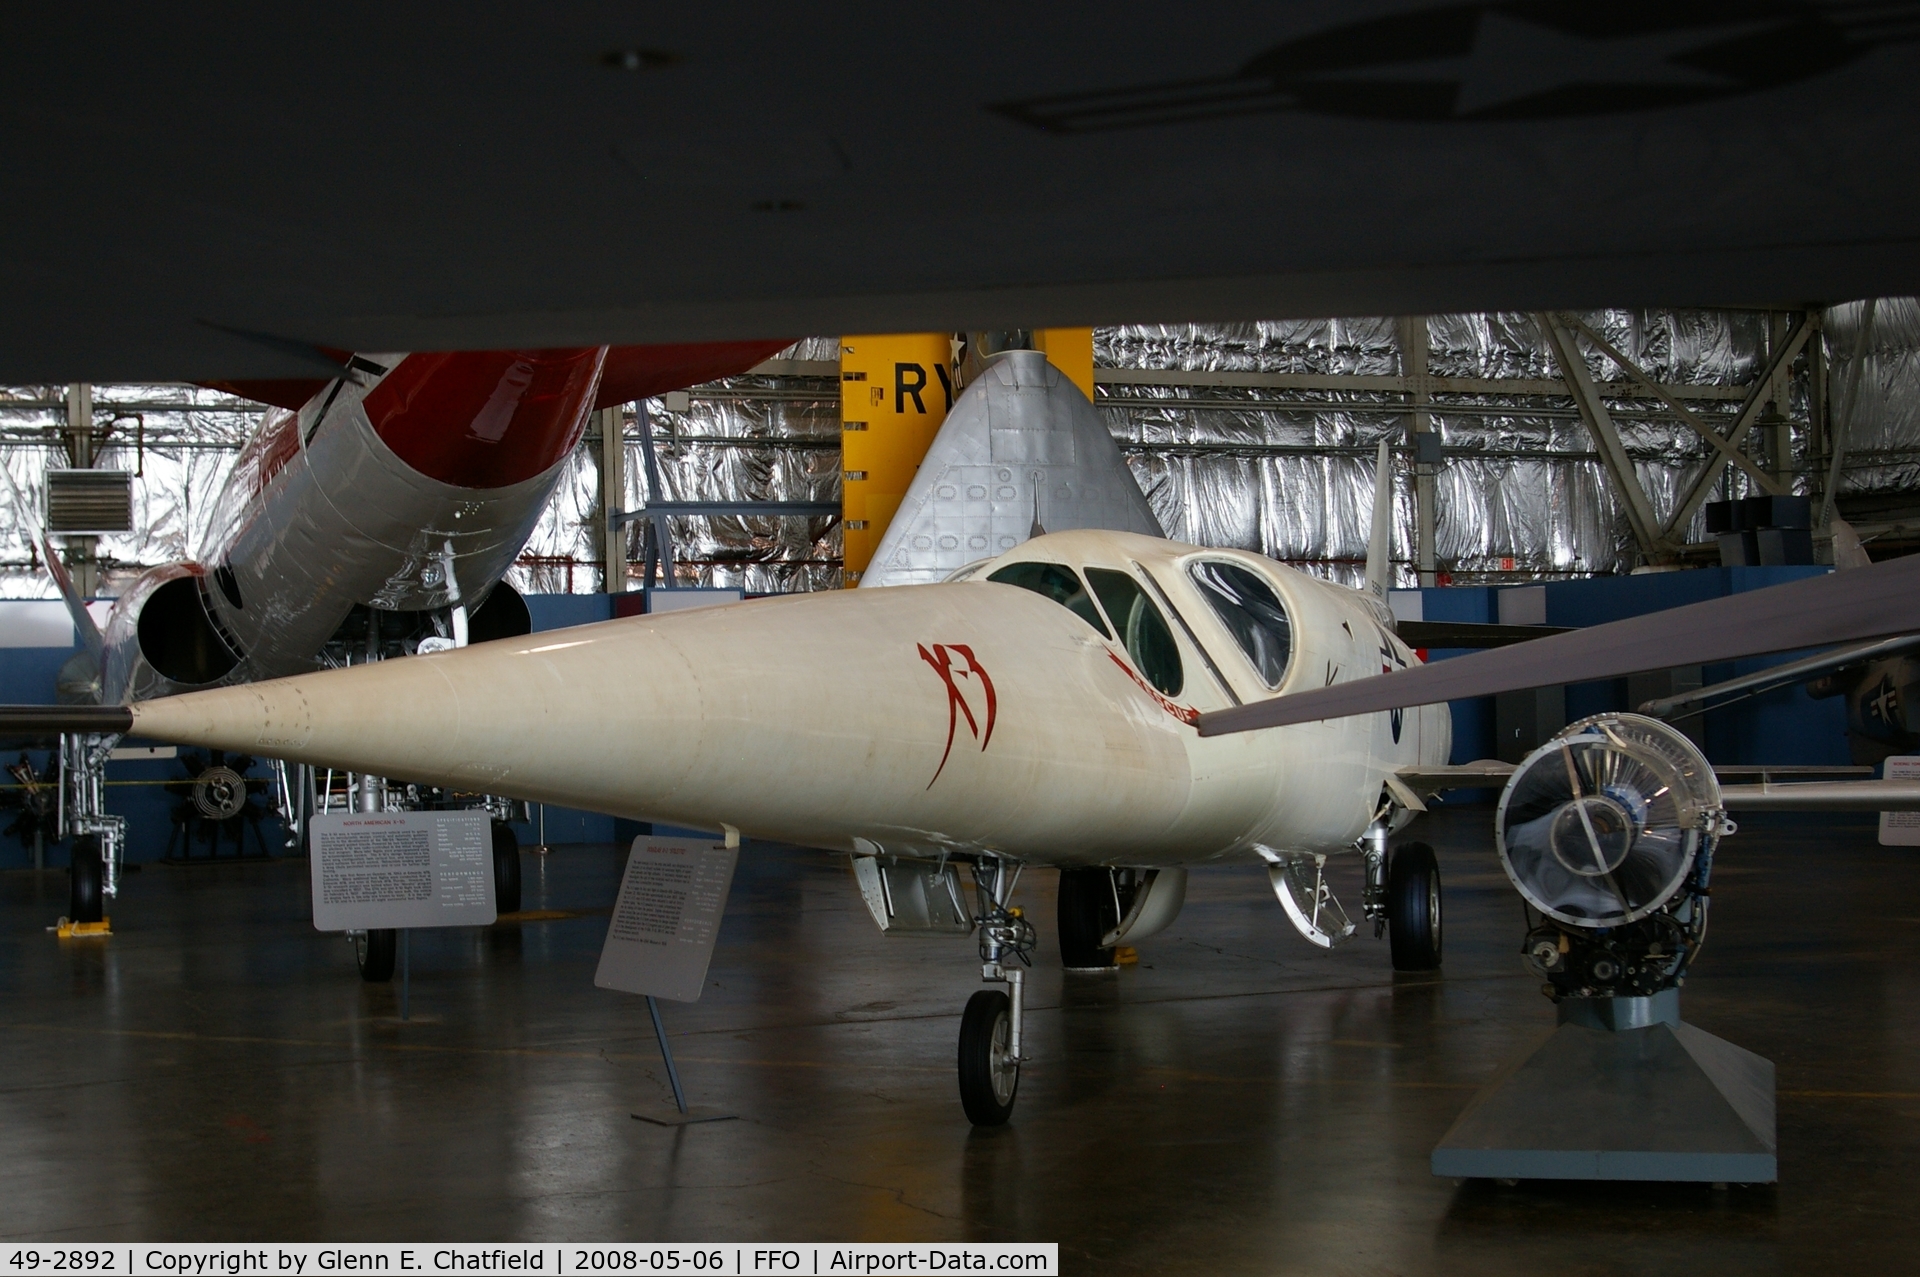 49-2892, 1949 Douglas X-3 Stiletto C/N Not found 49-2892, Displayed at the National Museum of the U.S. Air Force